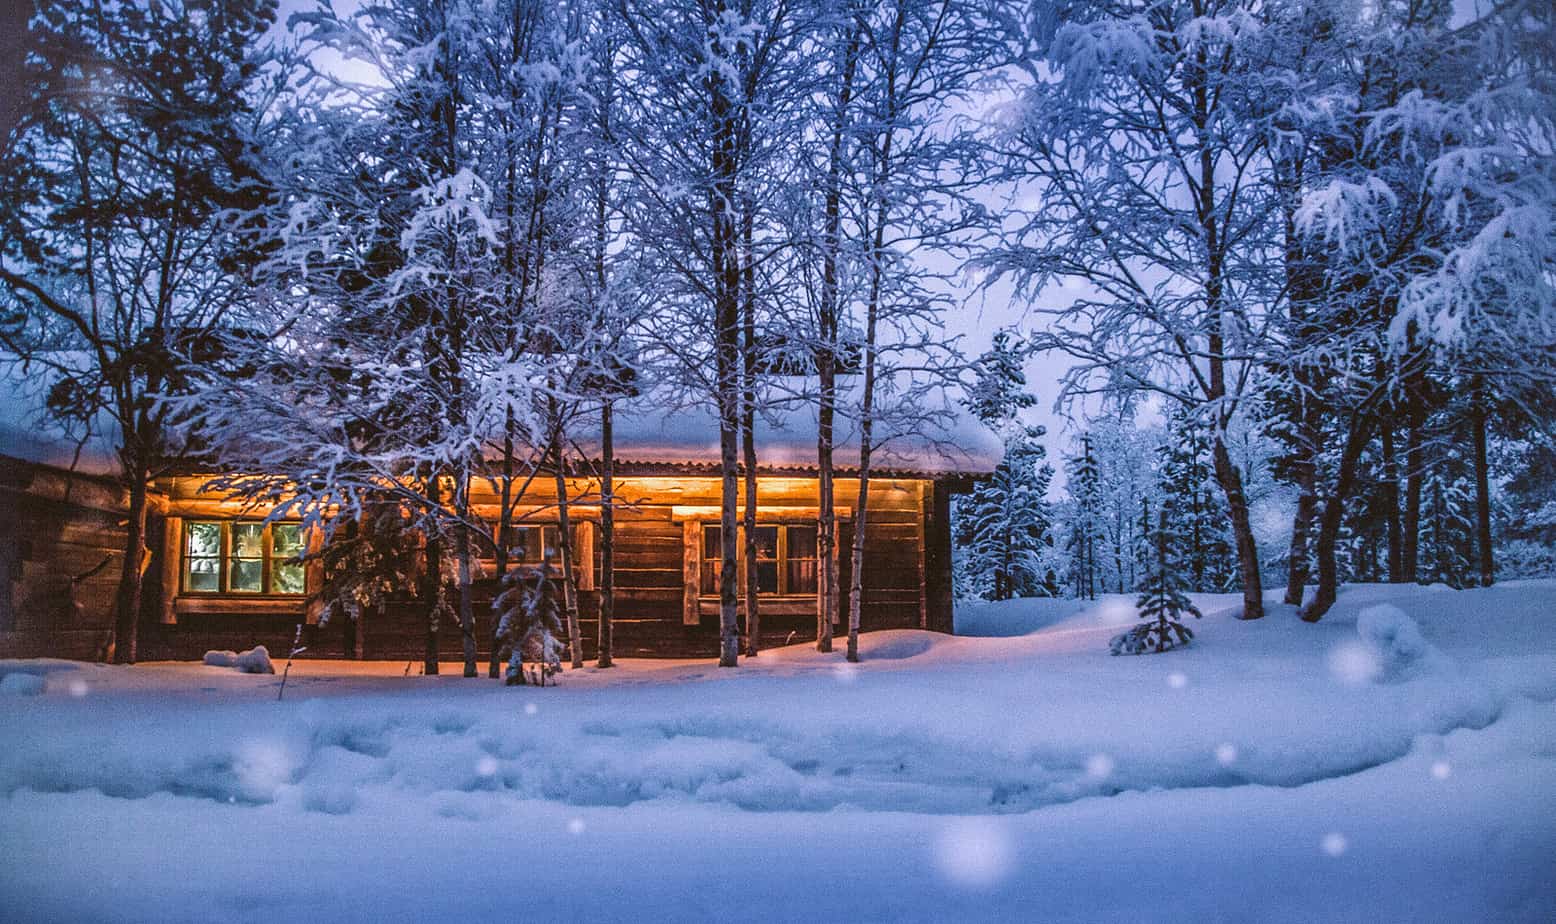 A cabin is dimly lit while surrounded by snow in a forest.